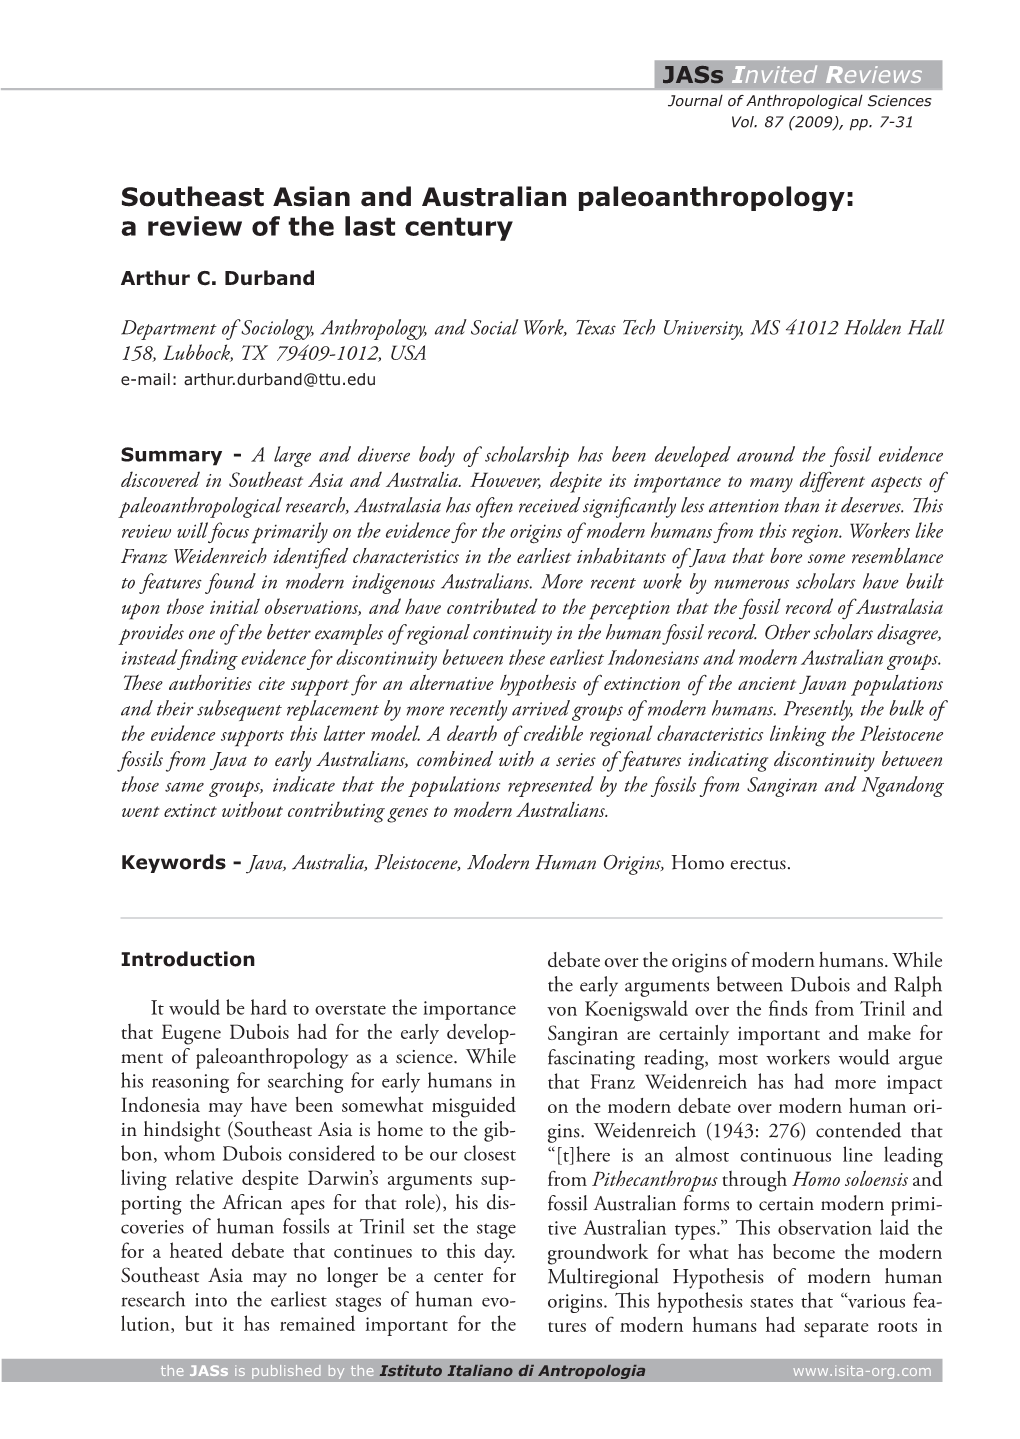 Southeast Asian and Australian Paleoanthropology: a Review of the Last Century